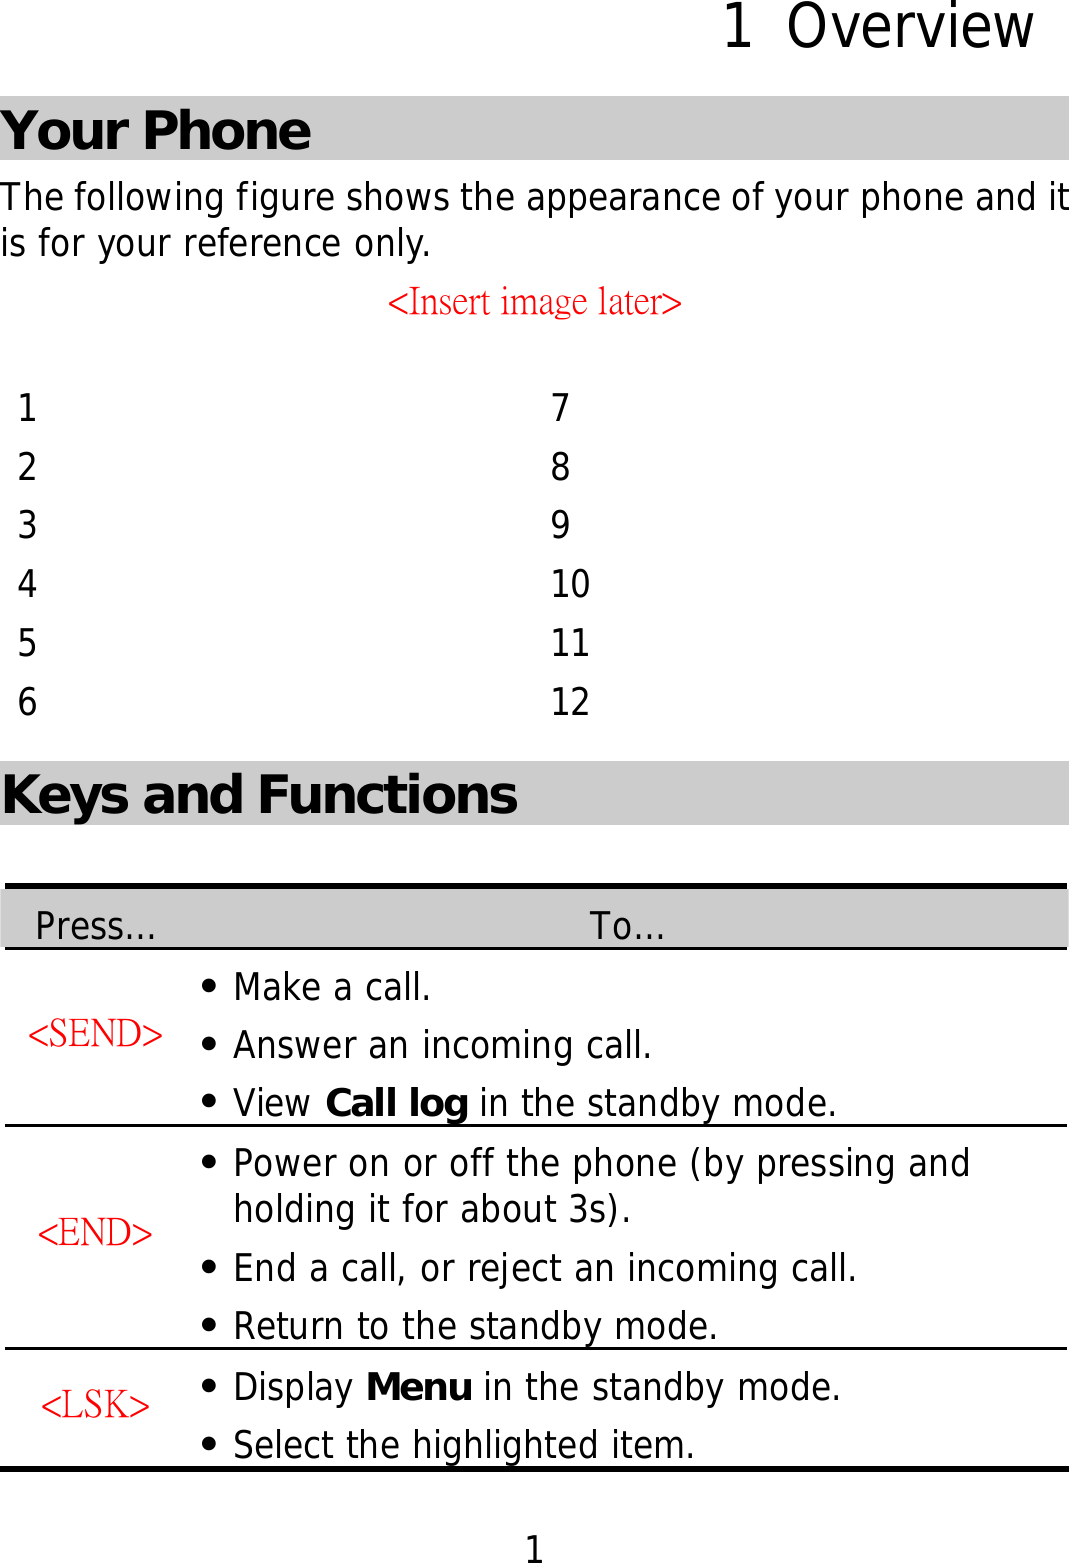 1 1 Overview Your Phone The following figure shows the appearance of your phone and it is for your reference only.  &lt;Insert image later&gt;  1   7   2   8   3   9   4   10  5   11  6   12  Keys and Functions  Press…  To… &lt;SEND&gt; z Make a call. z Answer an incoming call. z View Call log in the standby mode.  &lt;END&gt; z Power on or off the phone (by pressing and holding it for about 3s). z End a call, or reject an incoming call. z Return to the standby mode. &lt;LSK&gt; z Display Menu in the standby mode. z Select the highlighted item. 